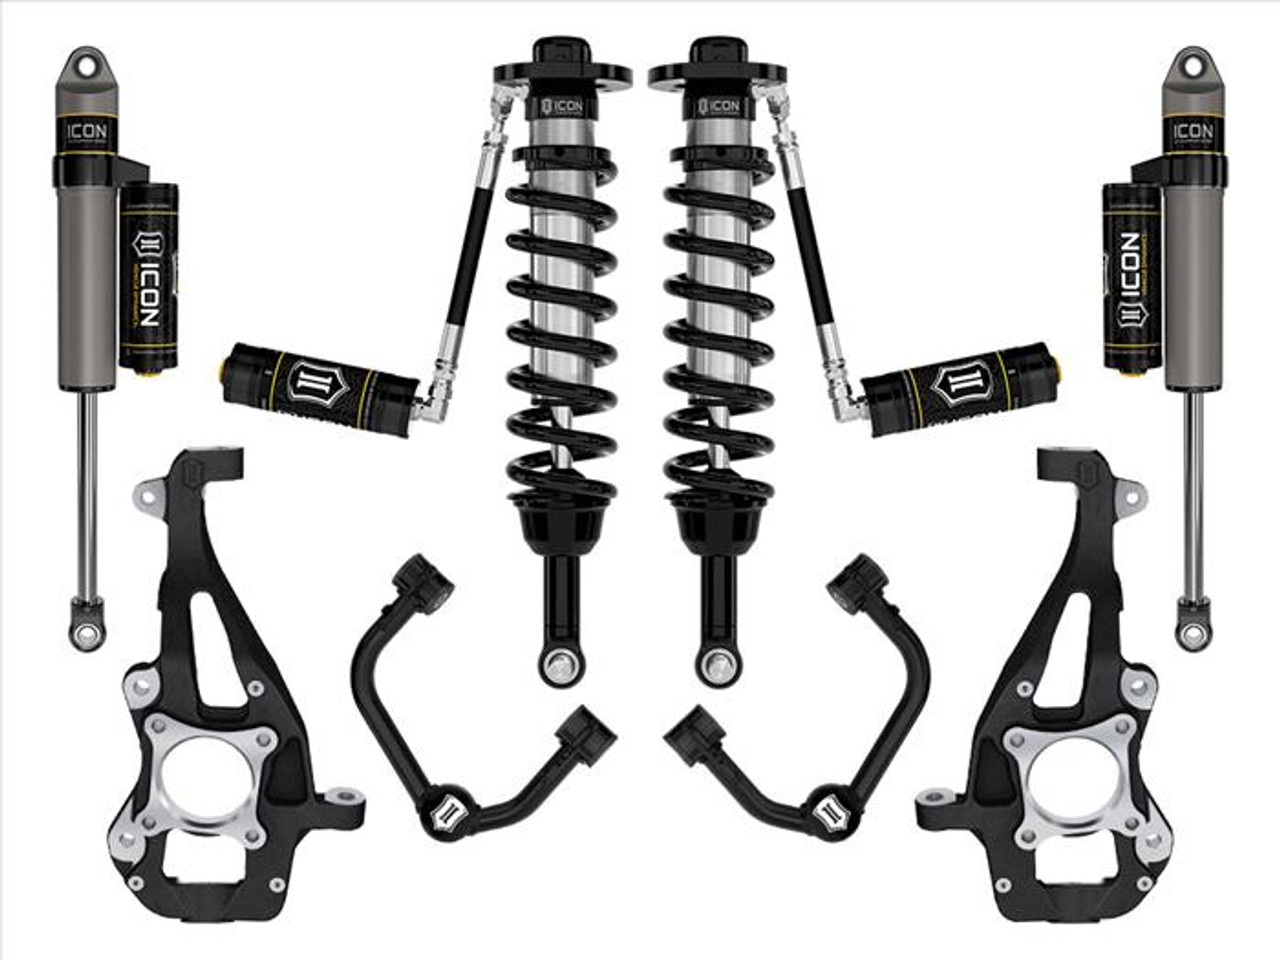  ICON 3.5-4.5" STAGE 3 SUSPENSION SYSTEM W TUBULAR UCA for 2021 to 2023 Ford F150 4WD (K93143T) mAIN vIEW 